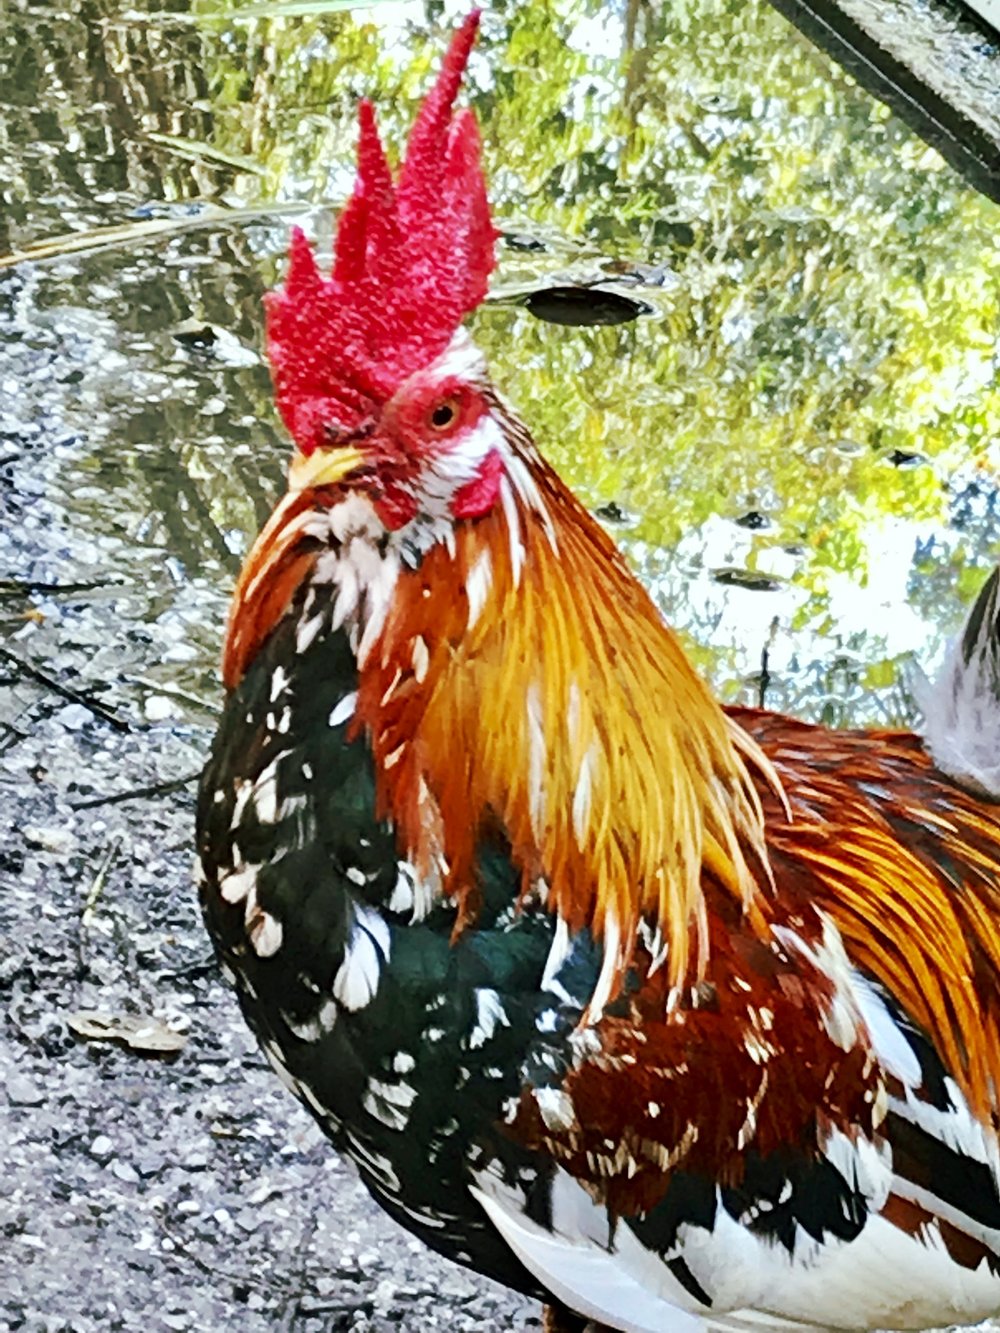 One of the many roosters strutting his gorgeous colors